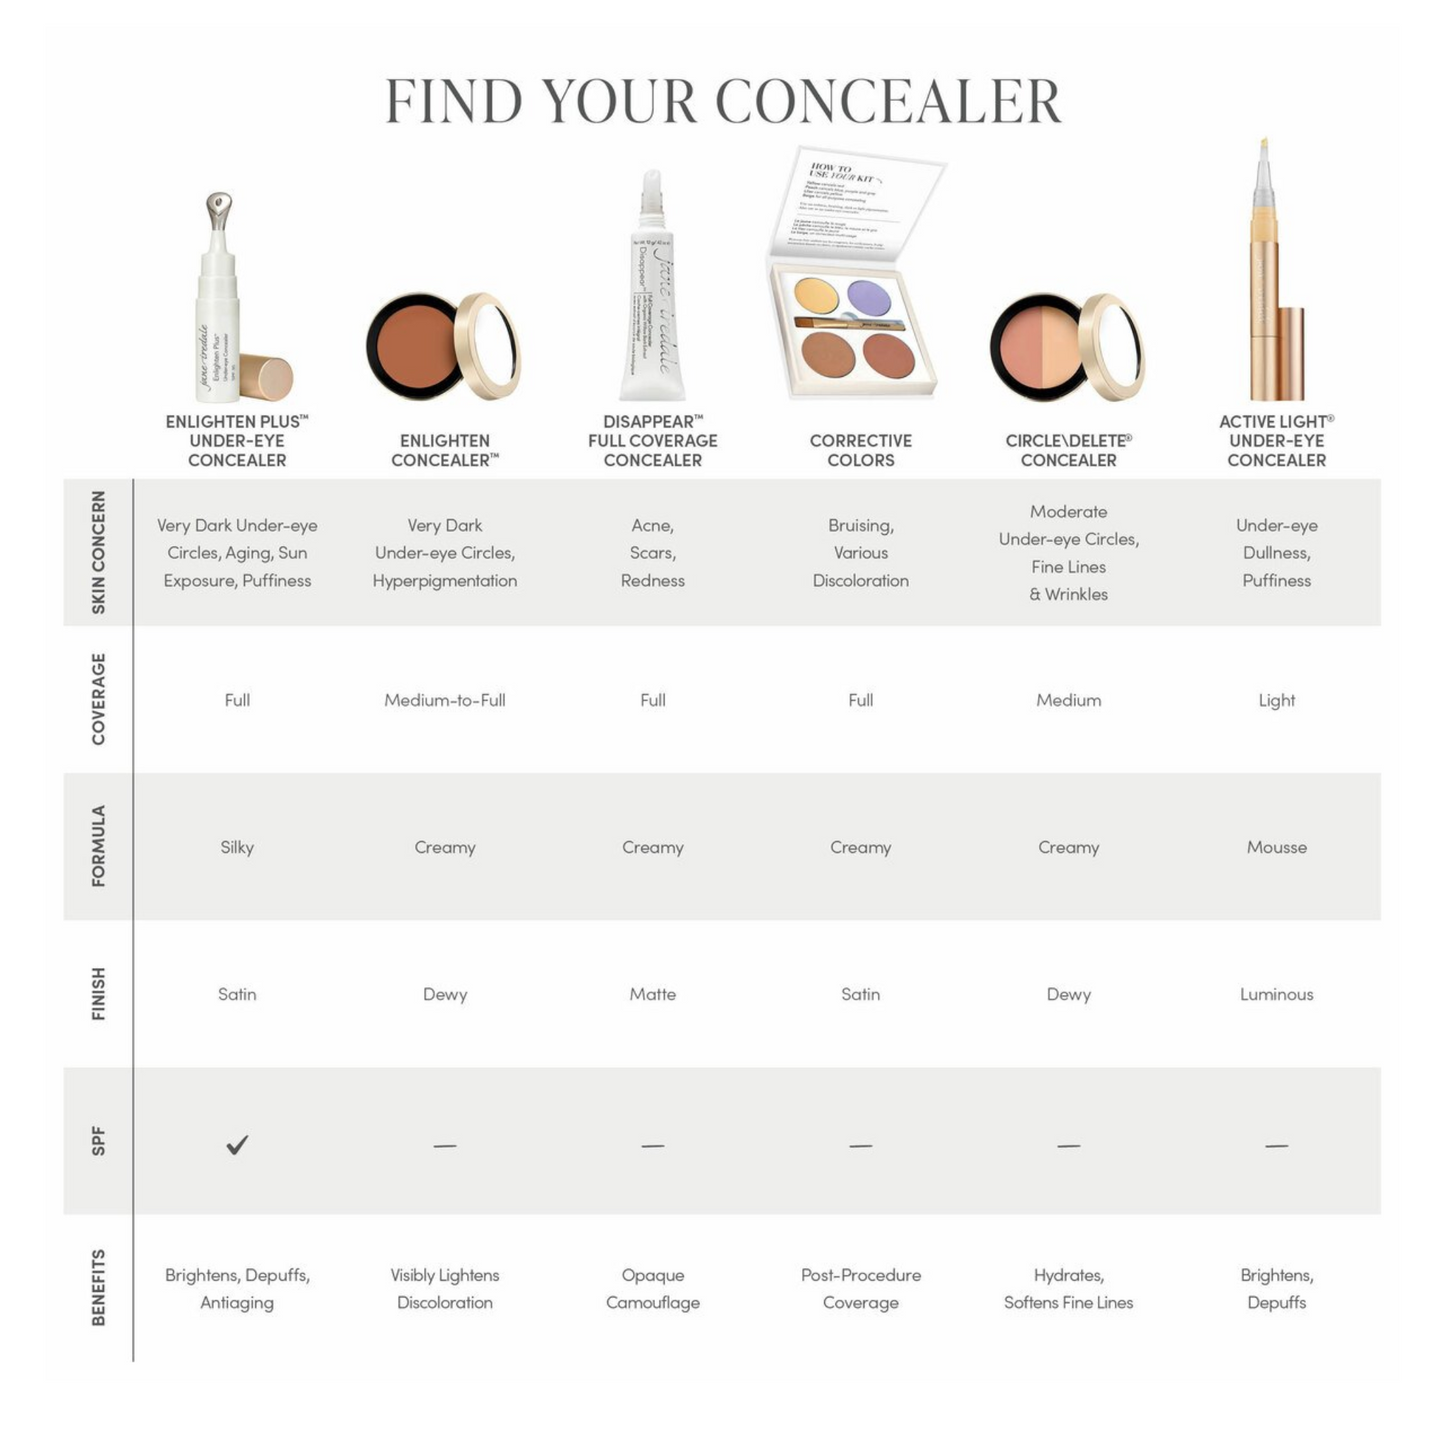 Jane Iredale Disappear Full-Coverage Concealer - Light